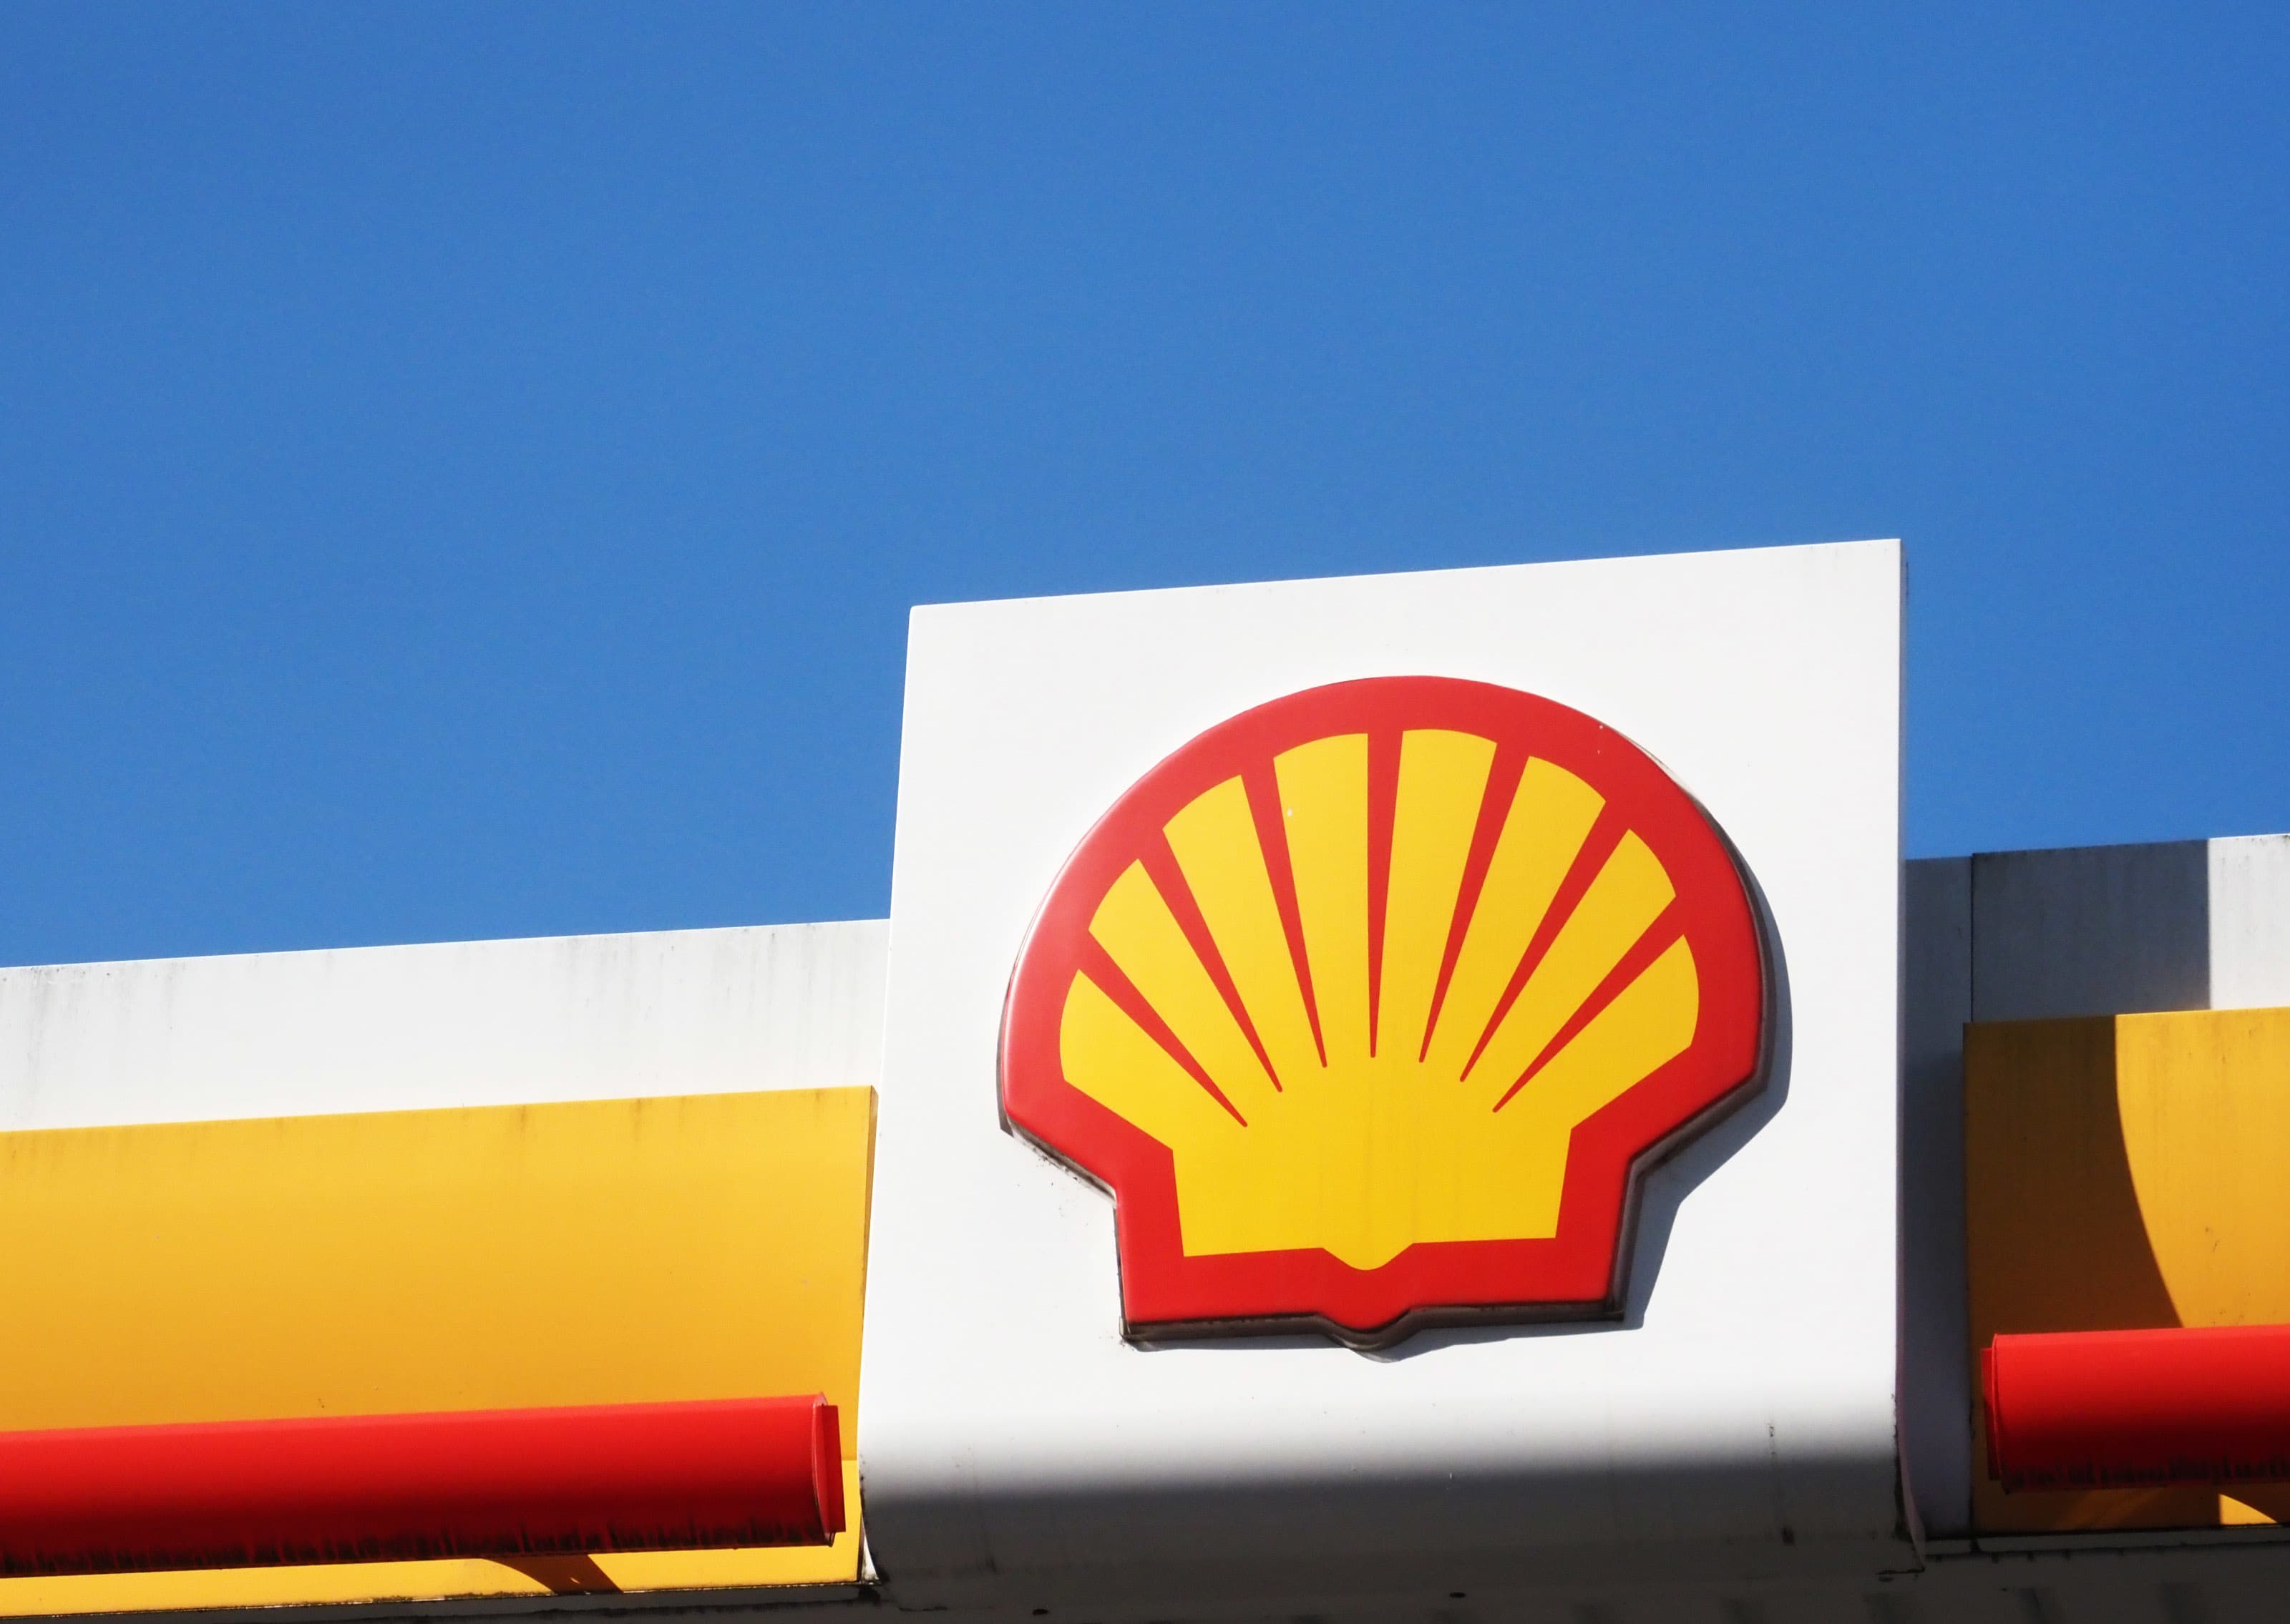 Shell beat expectations with a profit of USD 9.6 billion in the first quarter